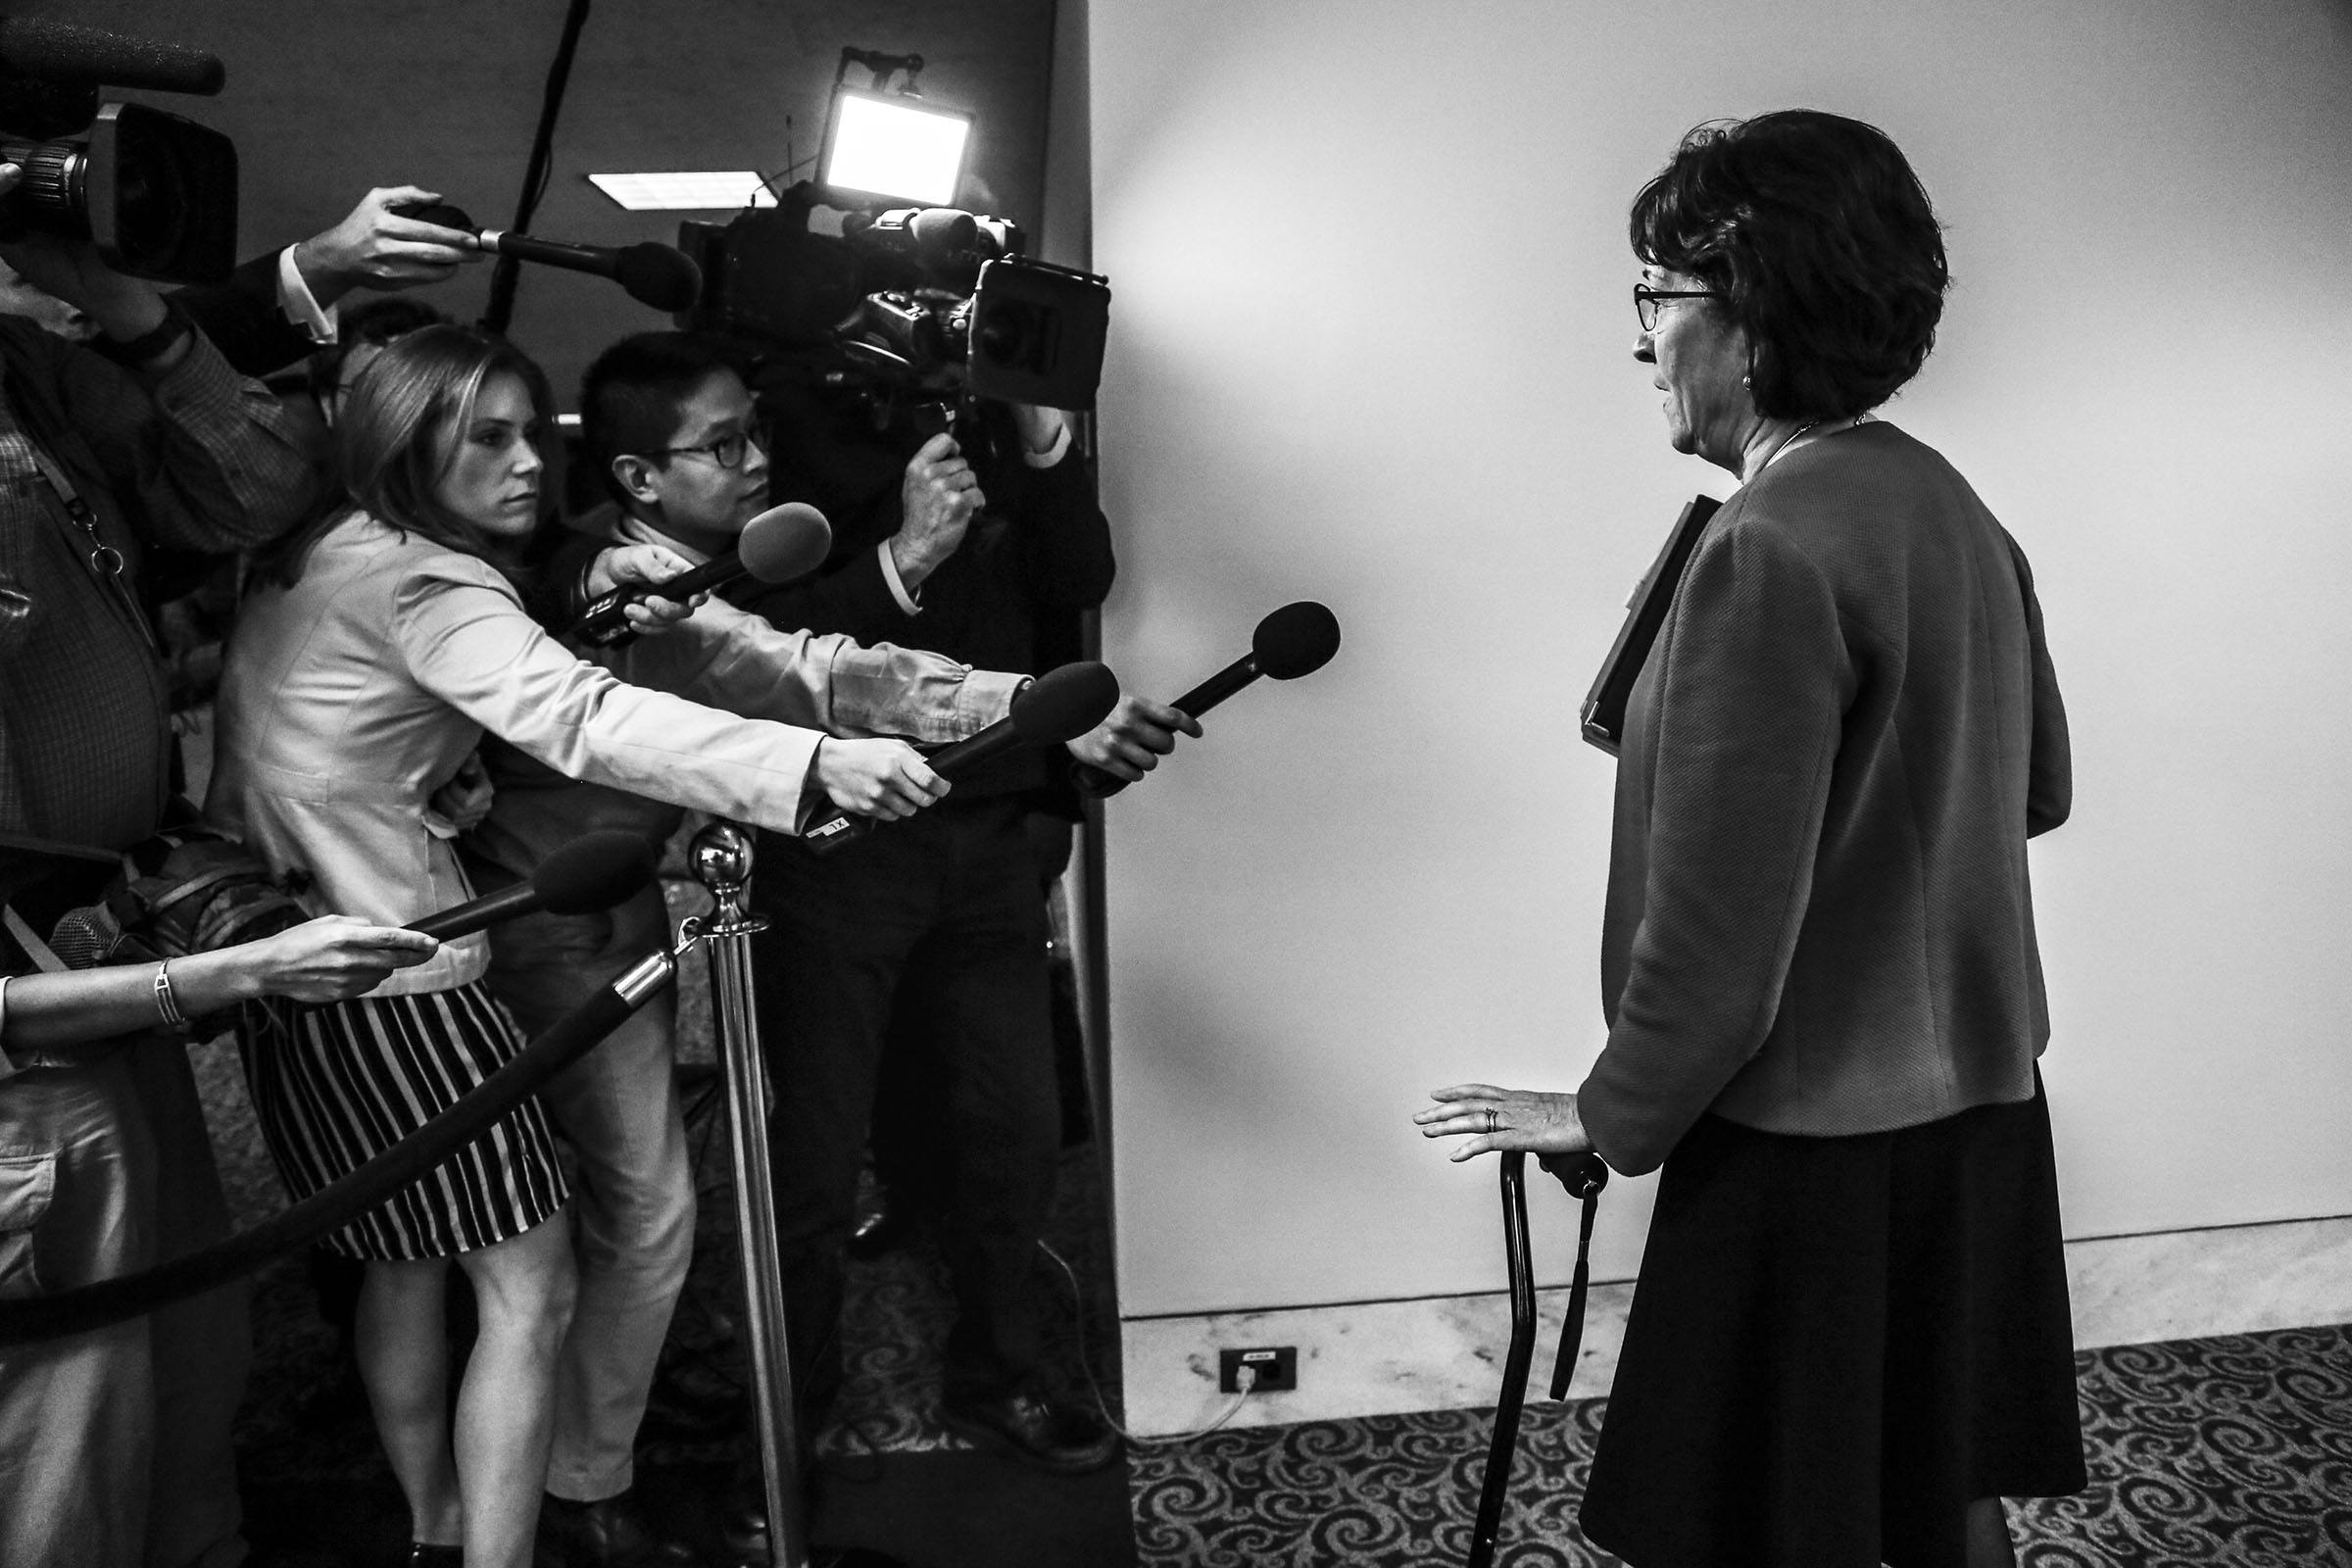   Sen.&nbsp;Susan Collins (R-ME) takes questions from reporters in the Hart Senate Office Building.&nbsp;  